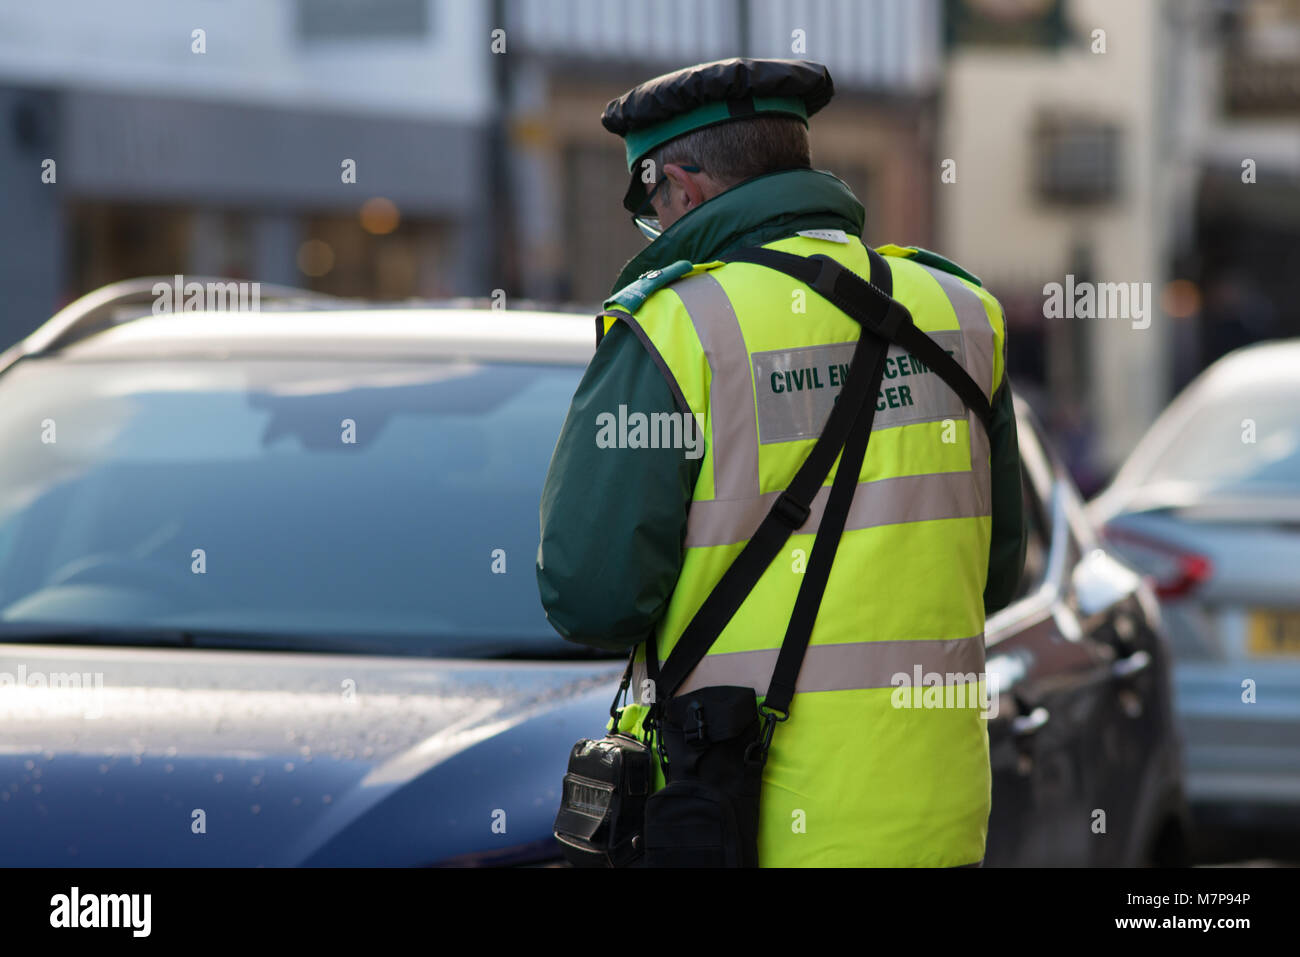 traffic warden civil enforcement officer issues parking ticket to illegally parked vehicle Stock Photo